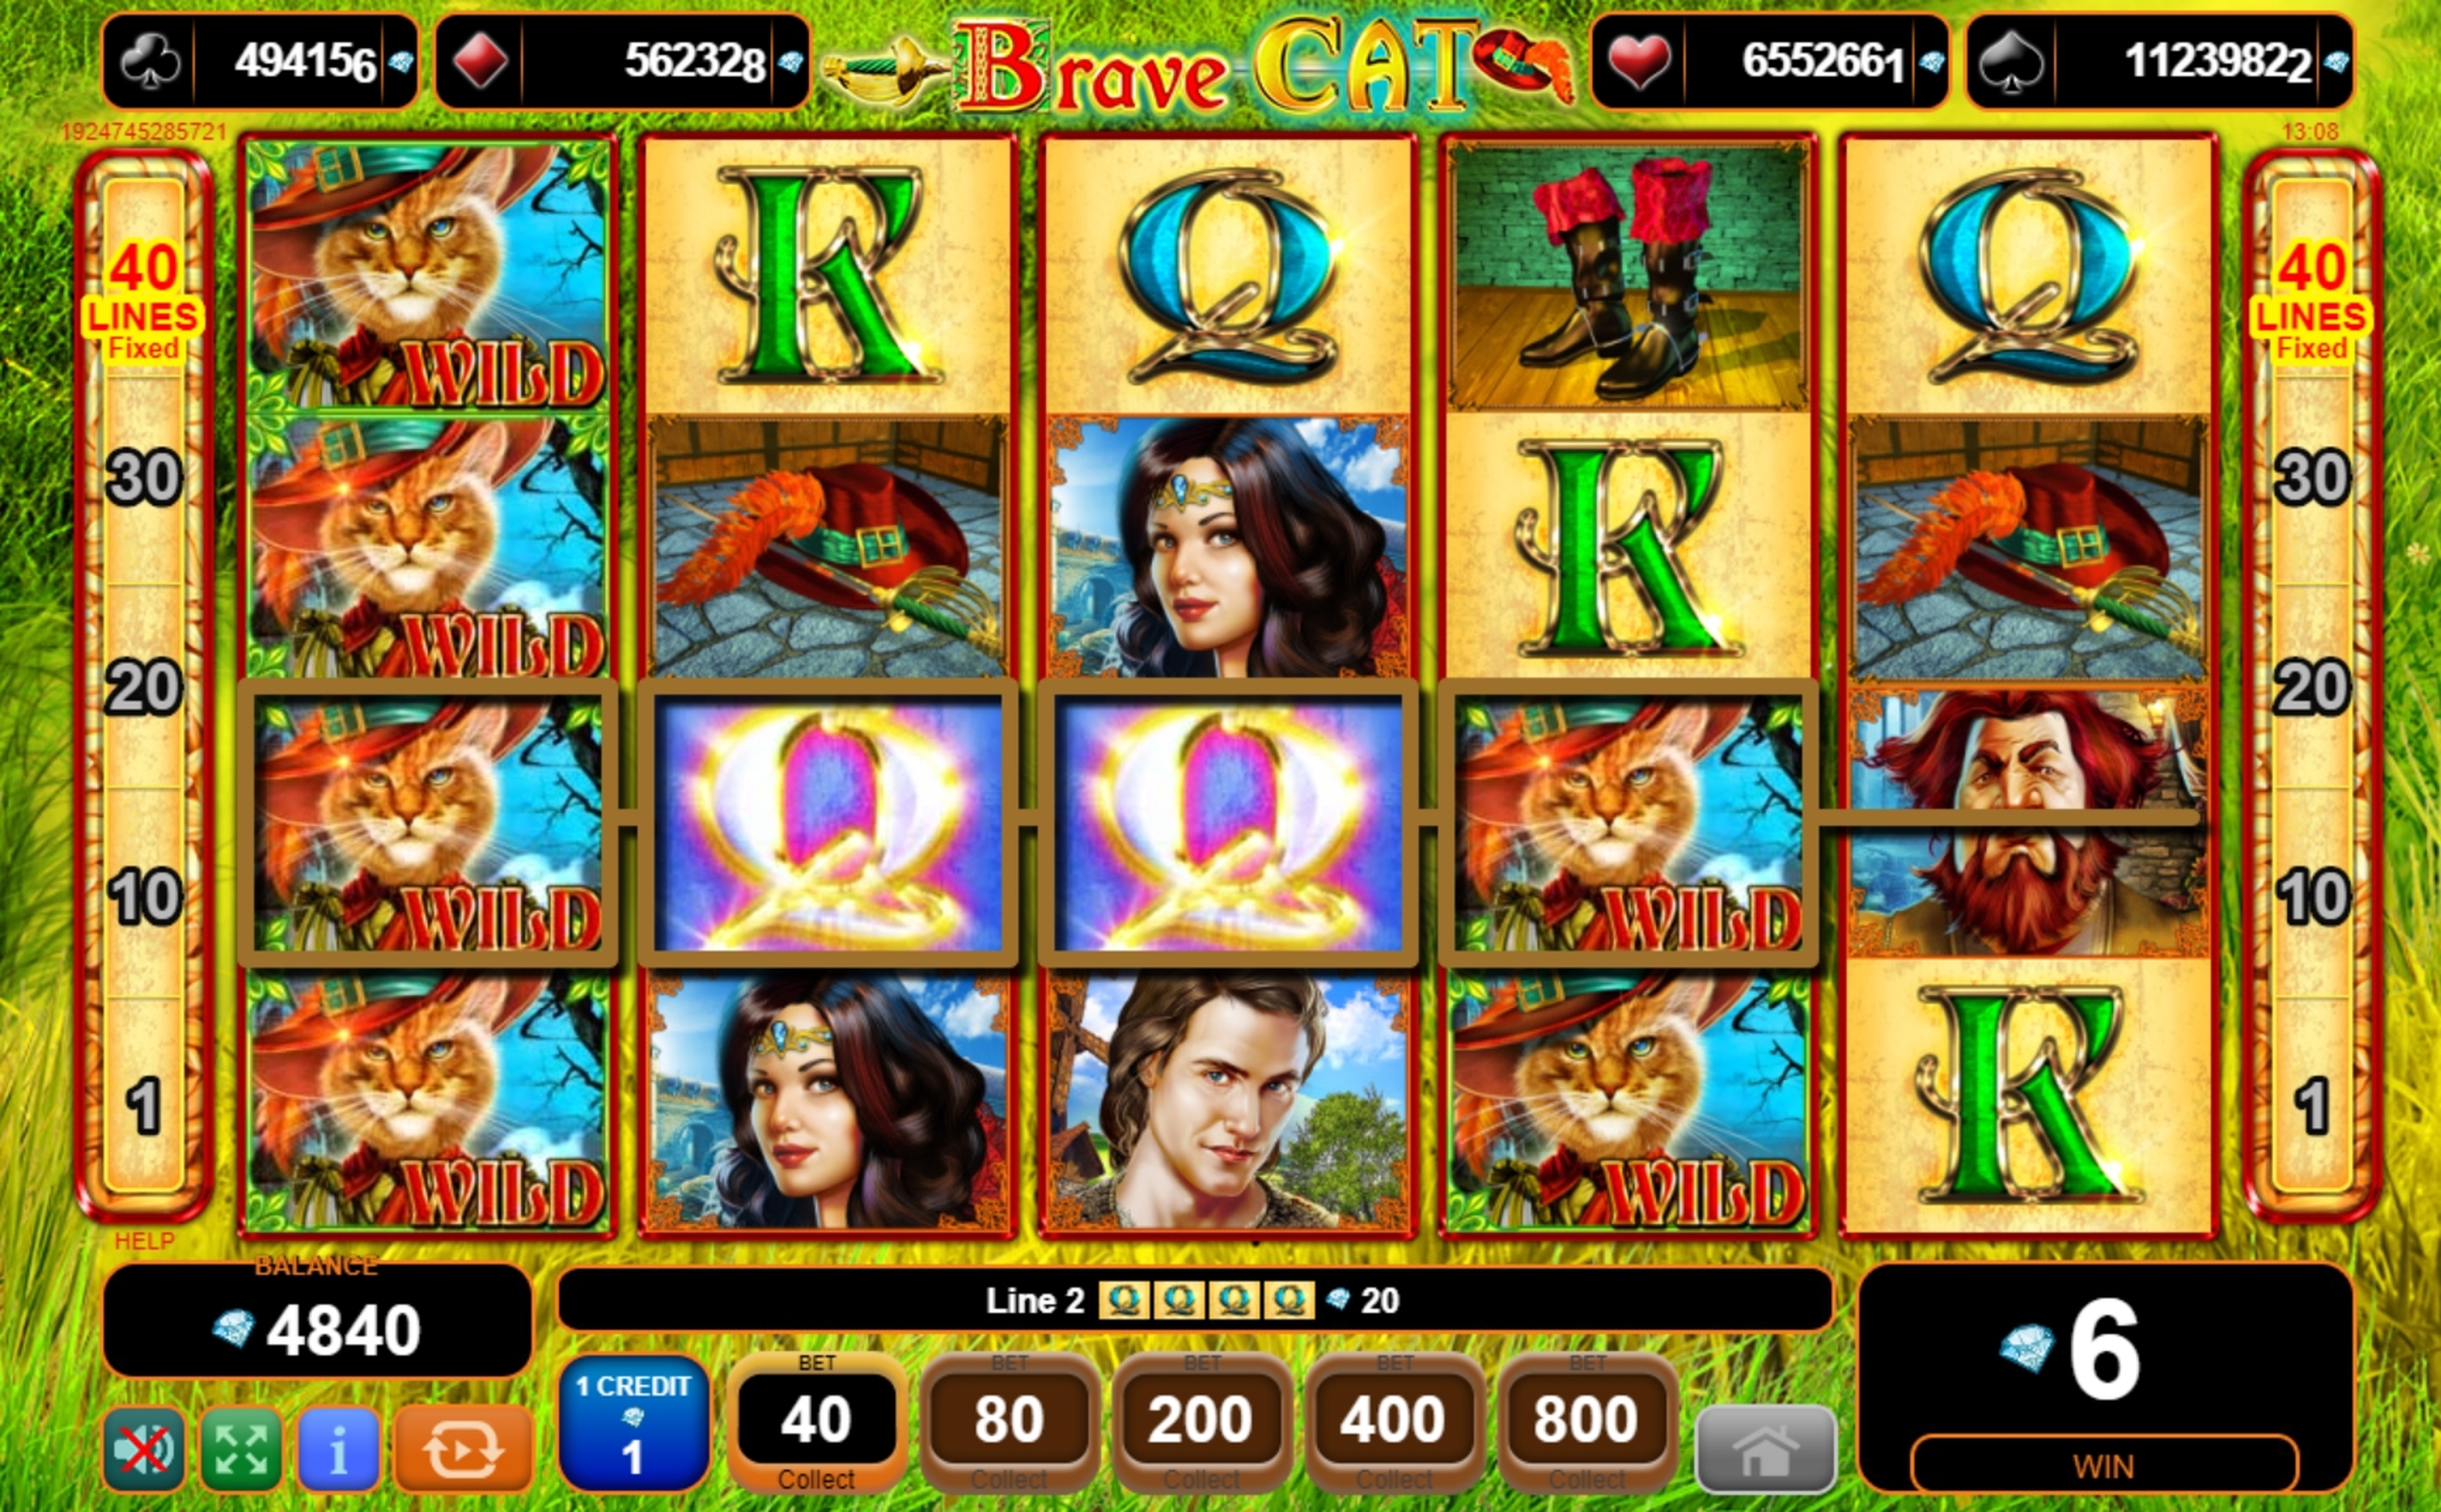 Win Money in Brave Cat Free Slot Game by EGT